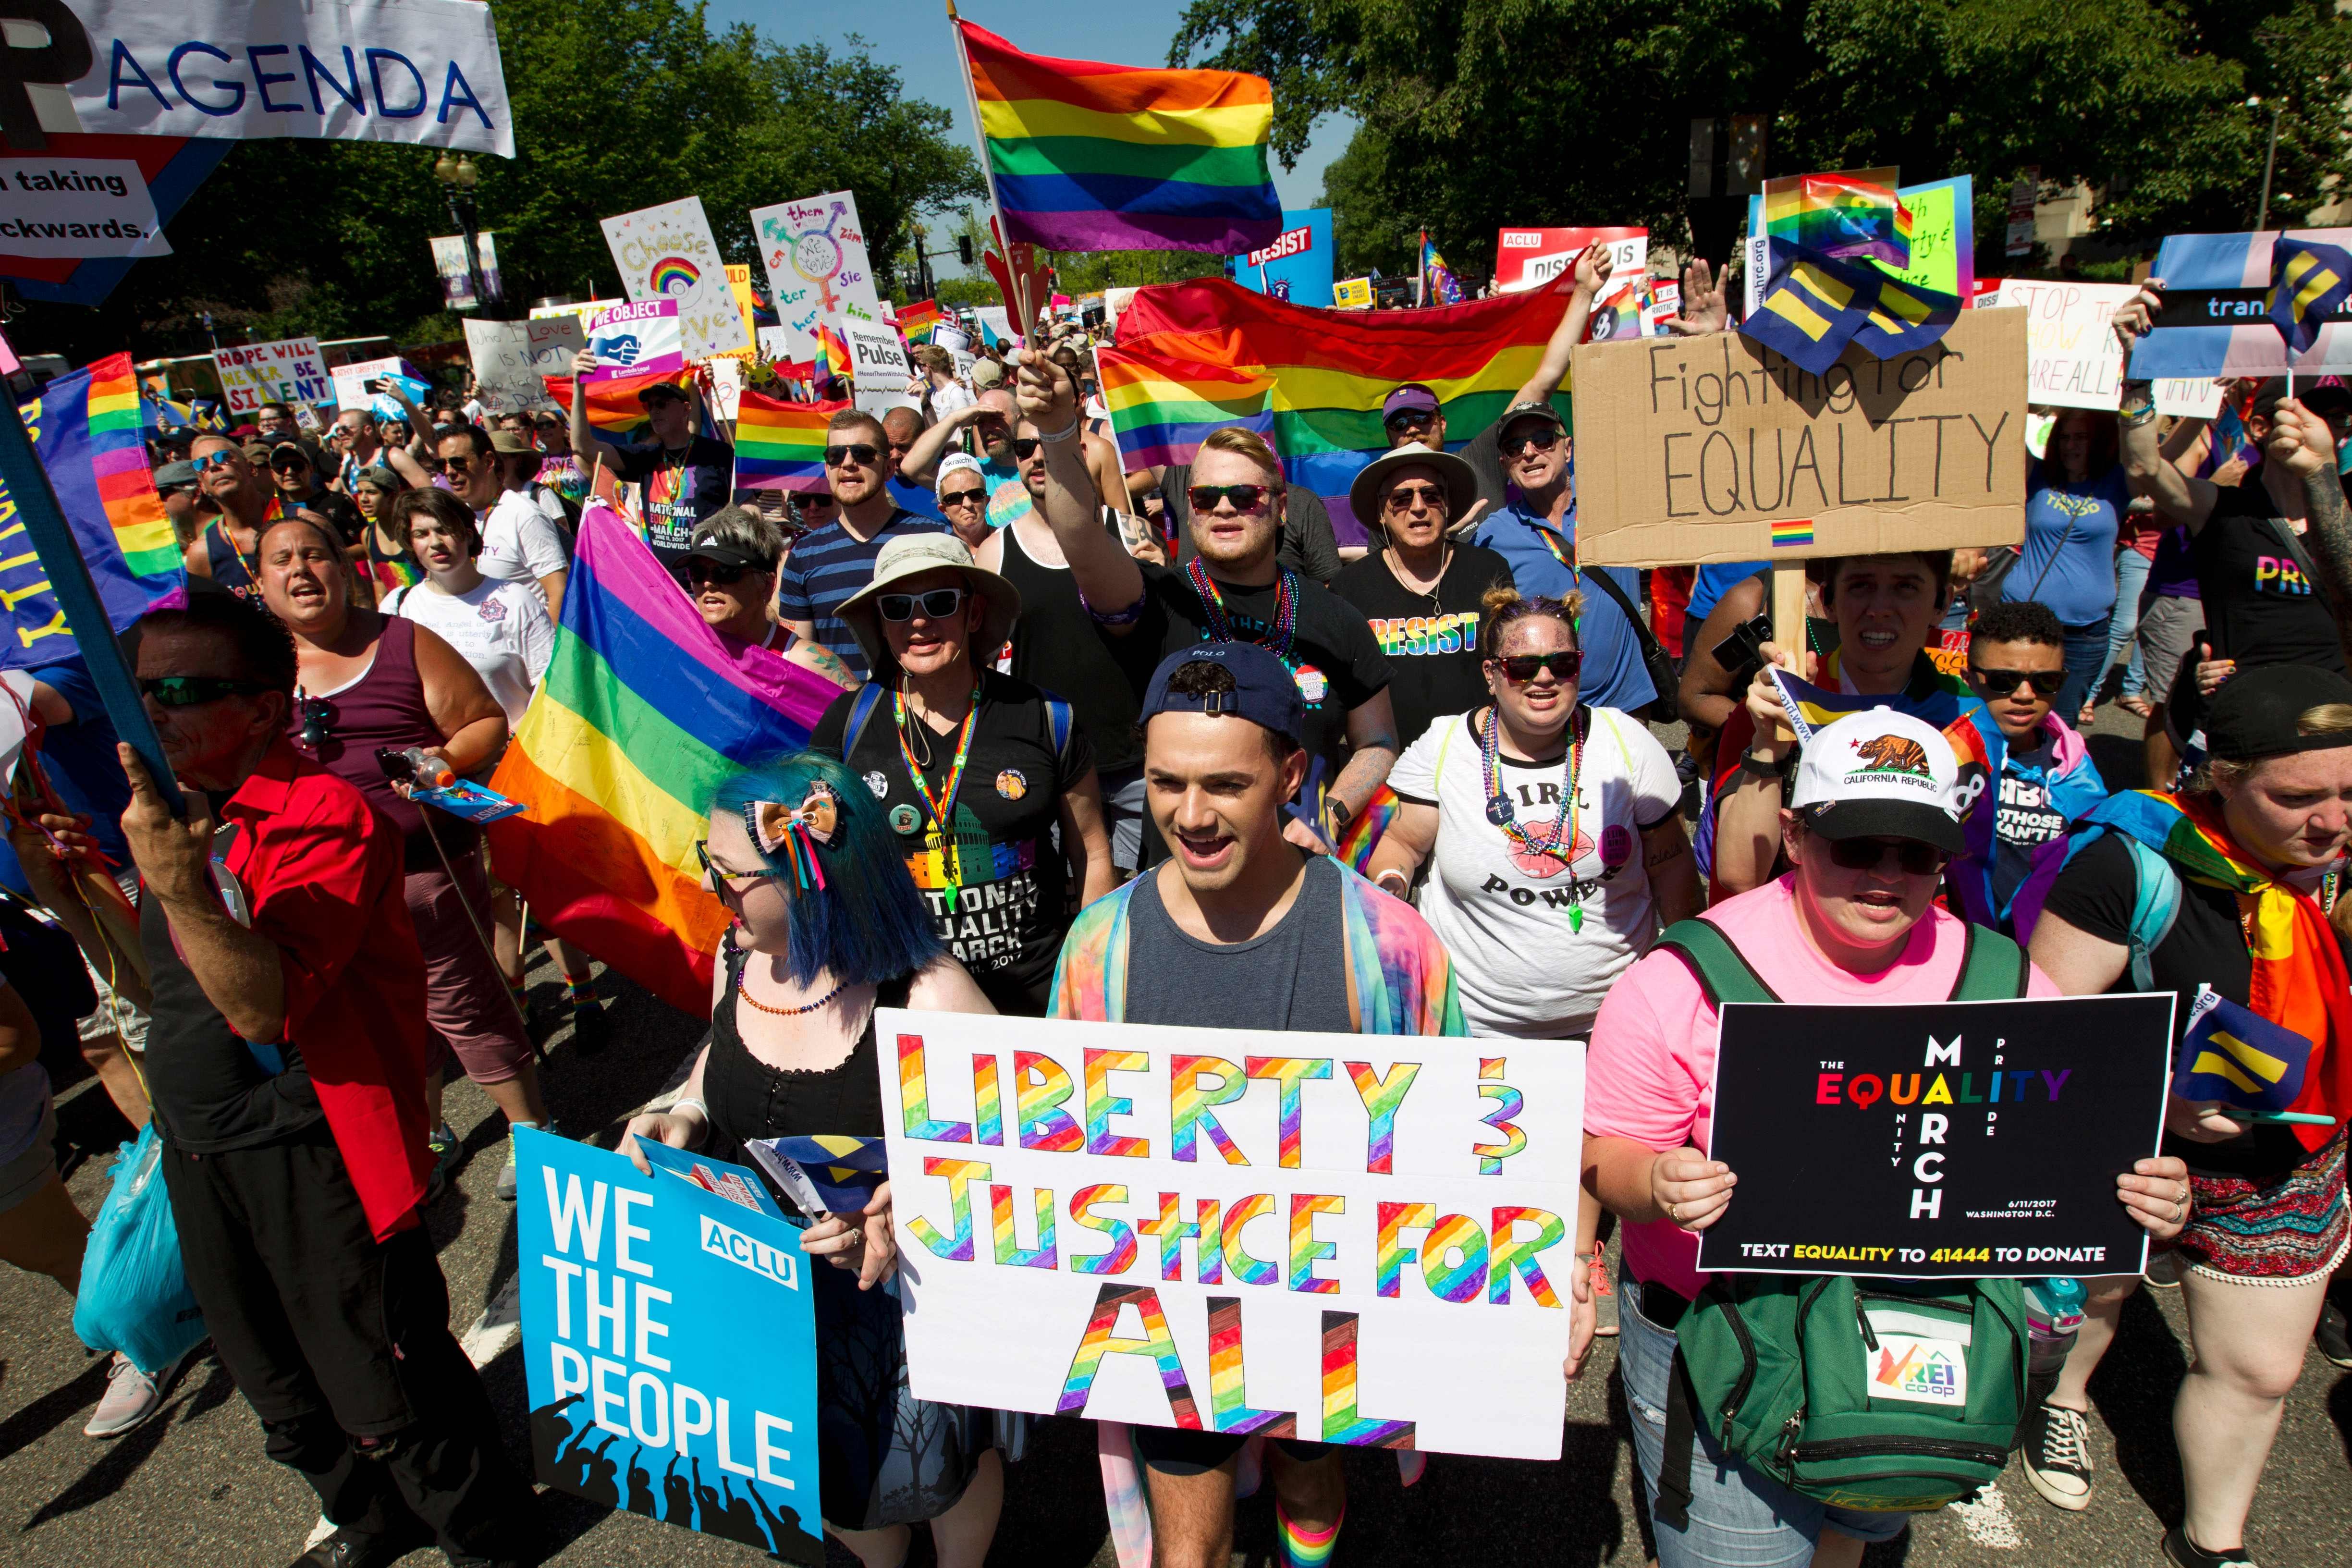 At Pride Events, Protests Claim Prejudice and Exclusion